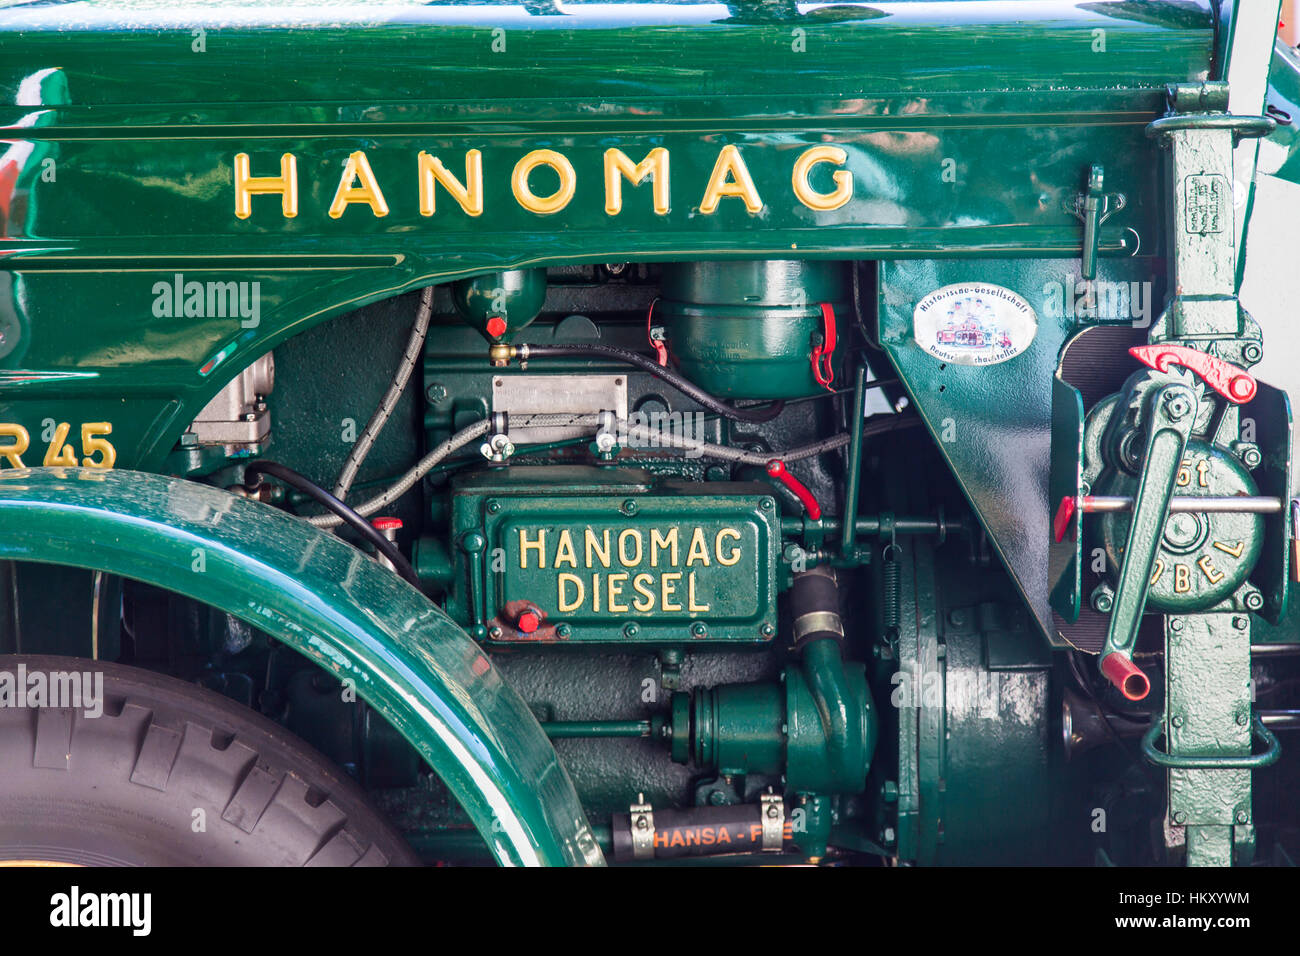 Engine of an old Hanomag diesel tractor, Stock Photo